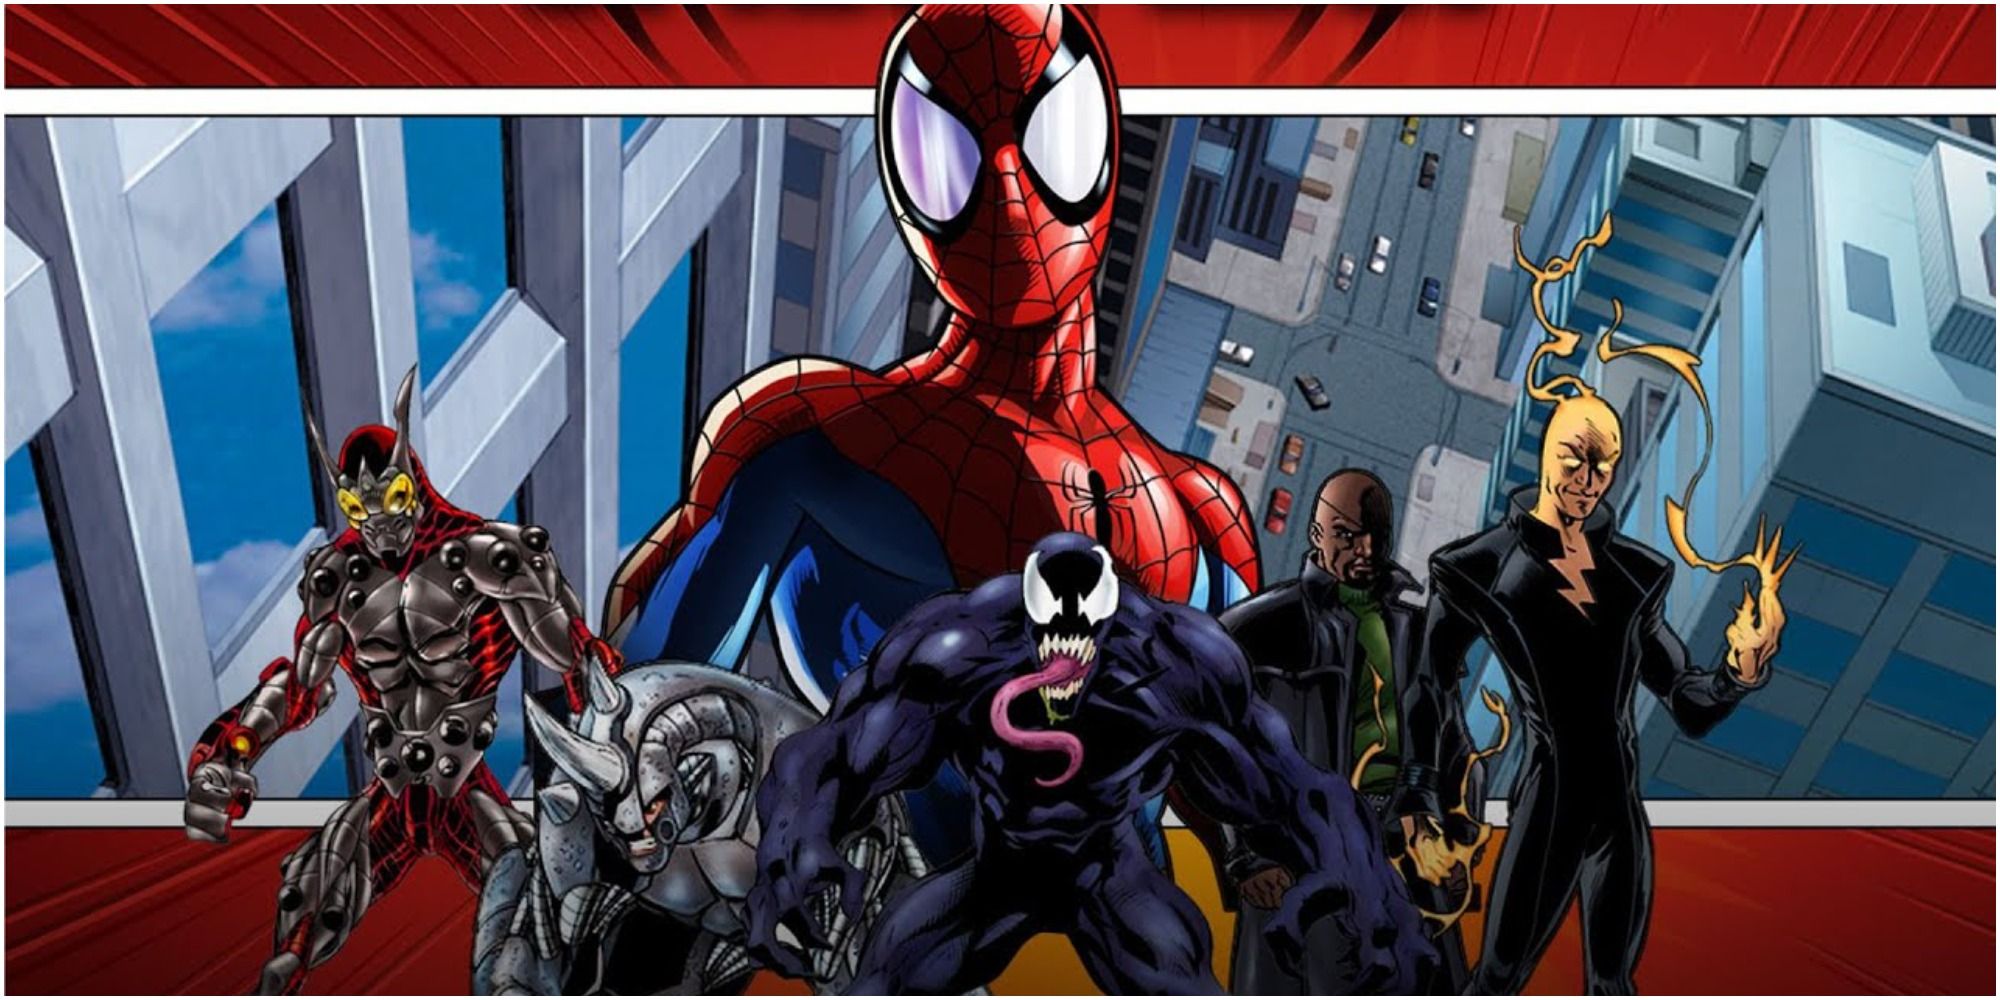 Spider-Man with Beetle, Rhino, Venom, Nick Fury and Electro from the Ultimate Spider-Man game